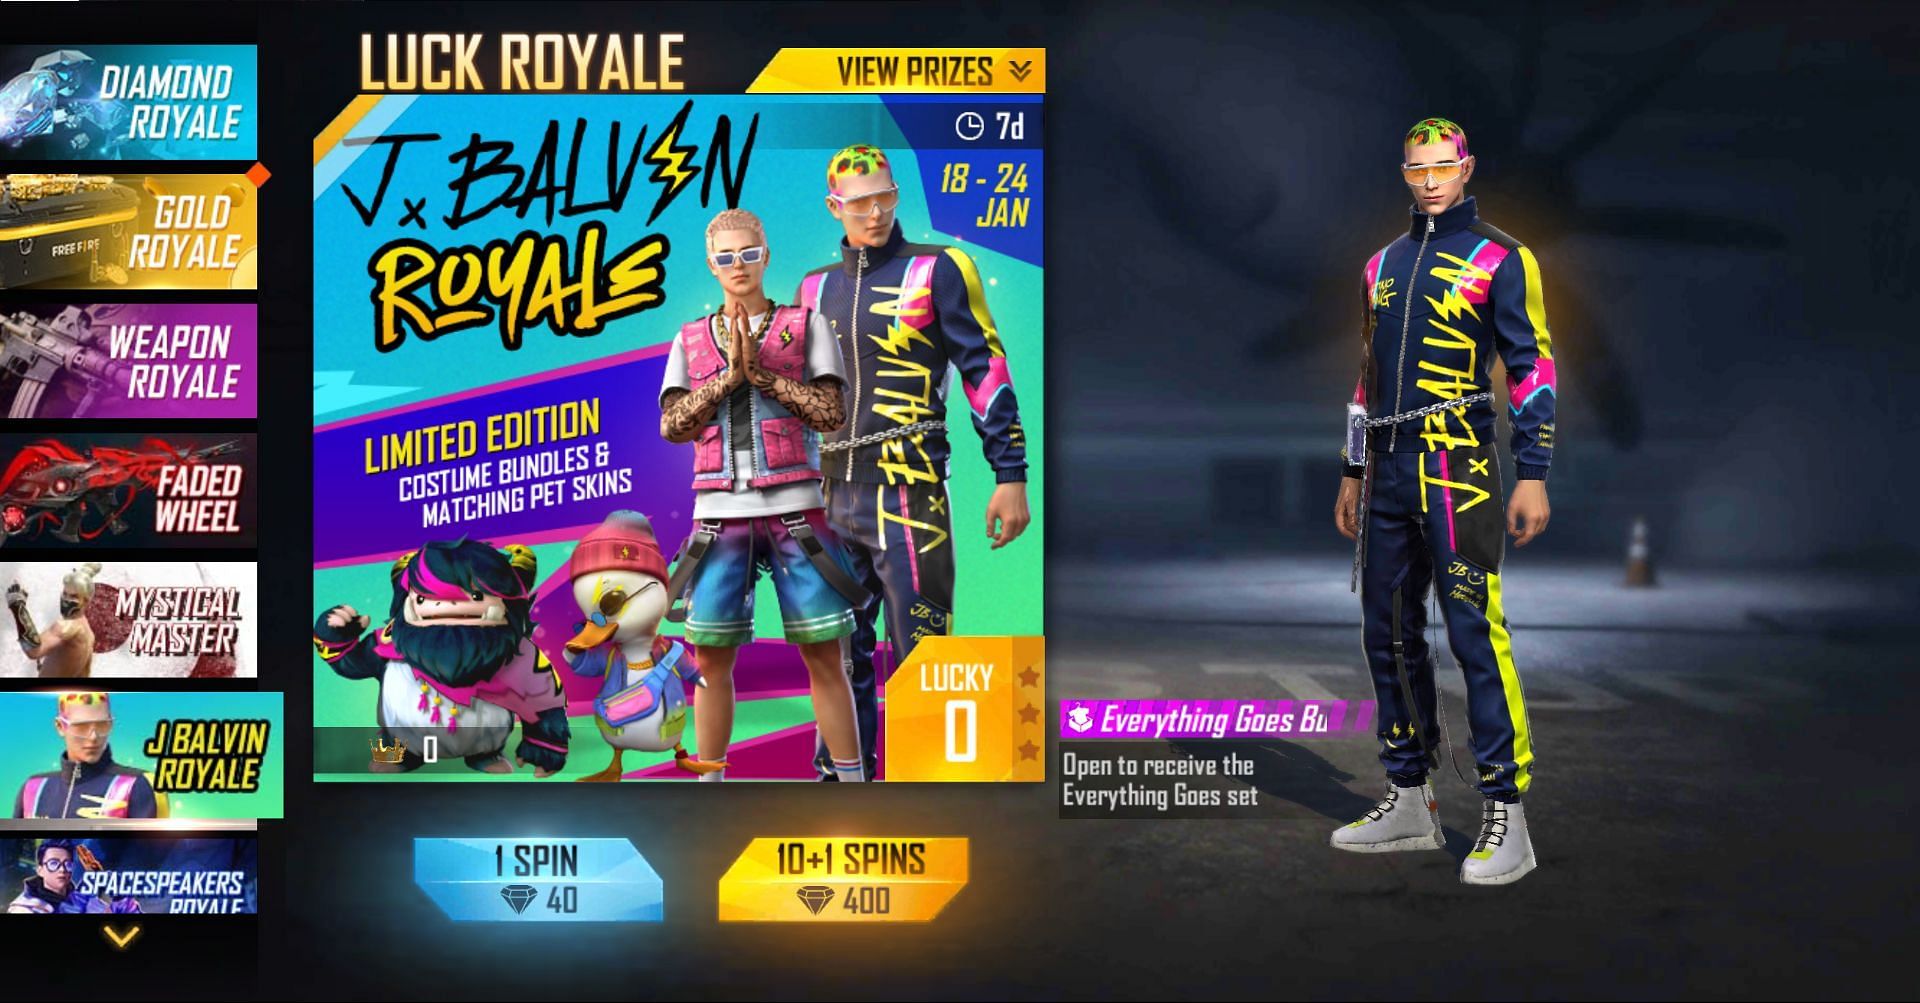 J Balvin Royale has been added to Free Fire (Image via Garena)